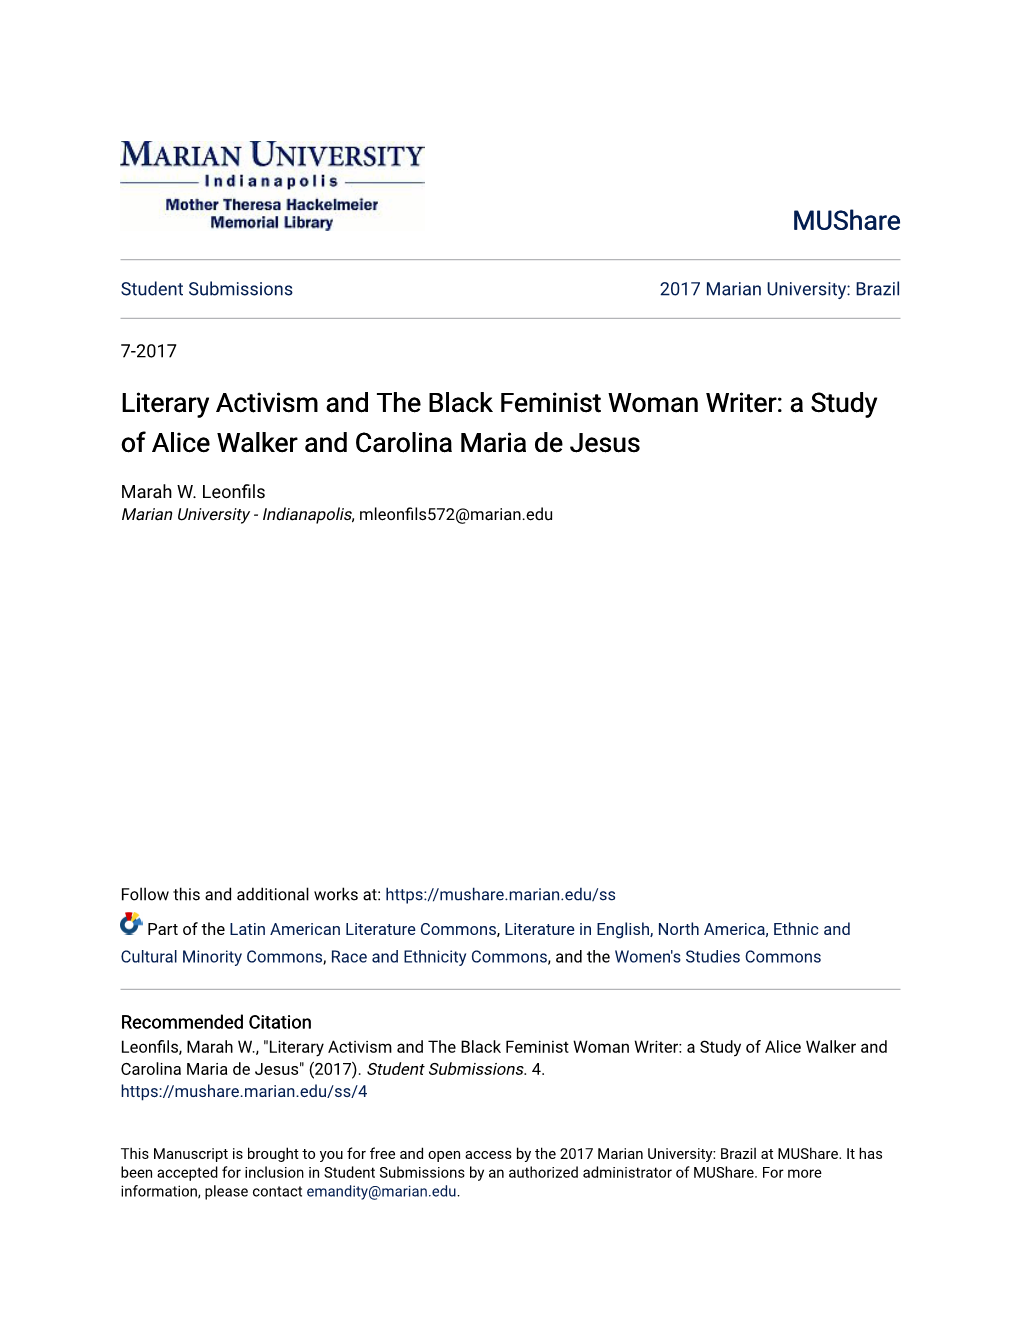 Literary Activism and the Black Feminist Woman Writer: a Study of Alice Walker and Carolina Maria De Jesus